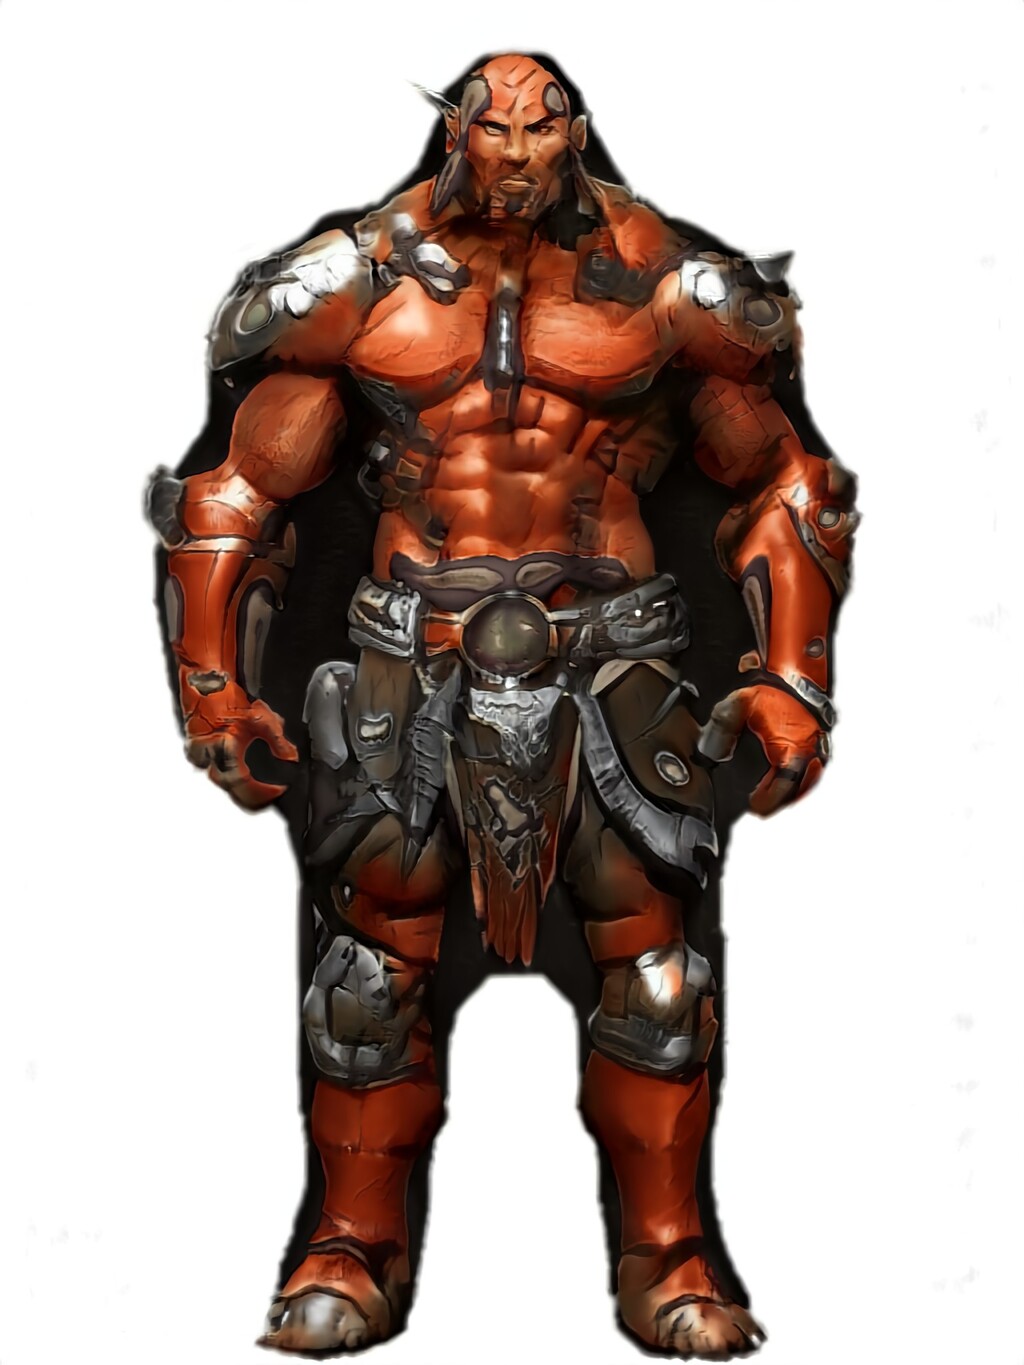 Most recent image: Red Orc